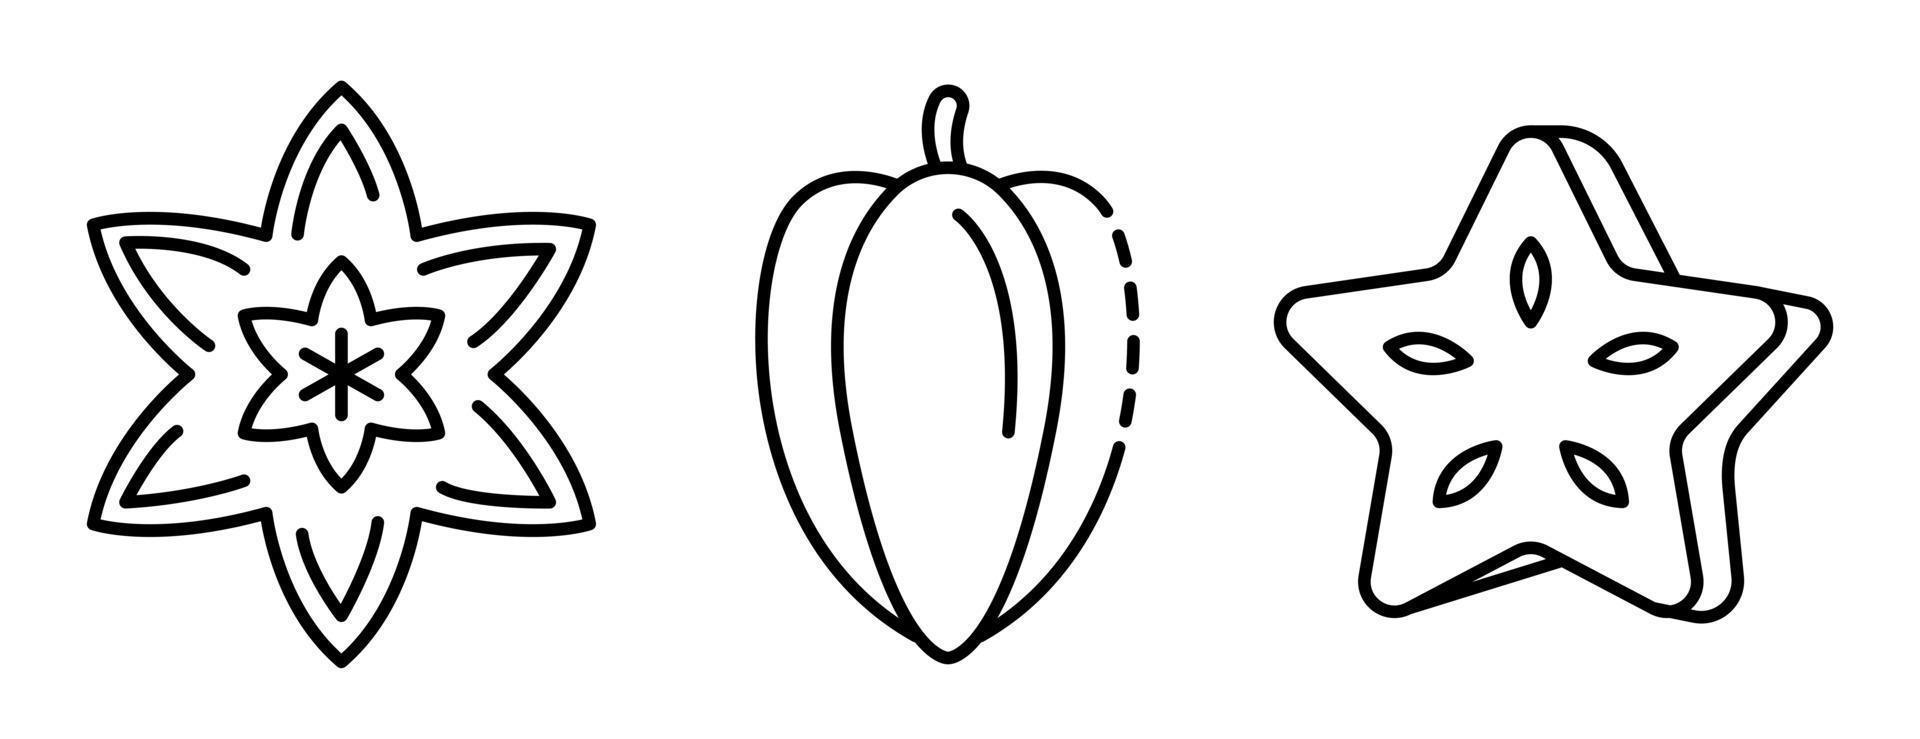 Carambola icons set, outline style vector